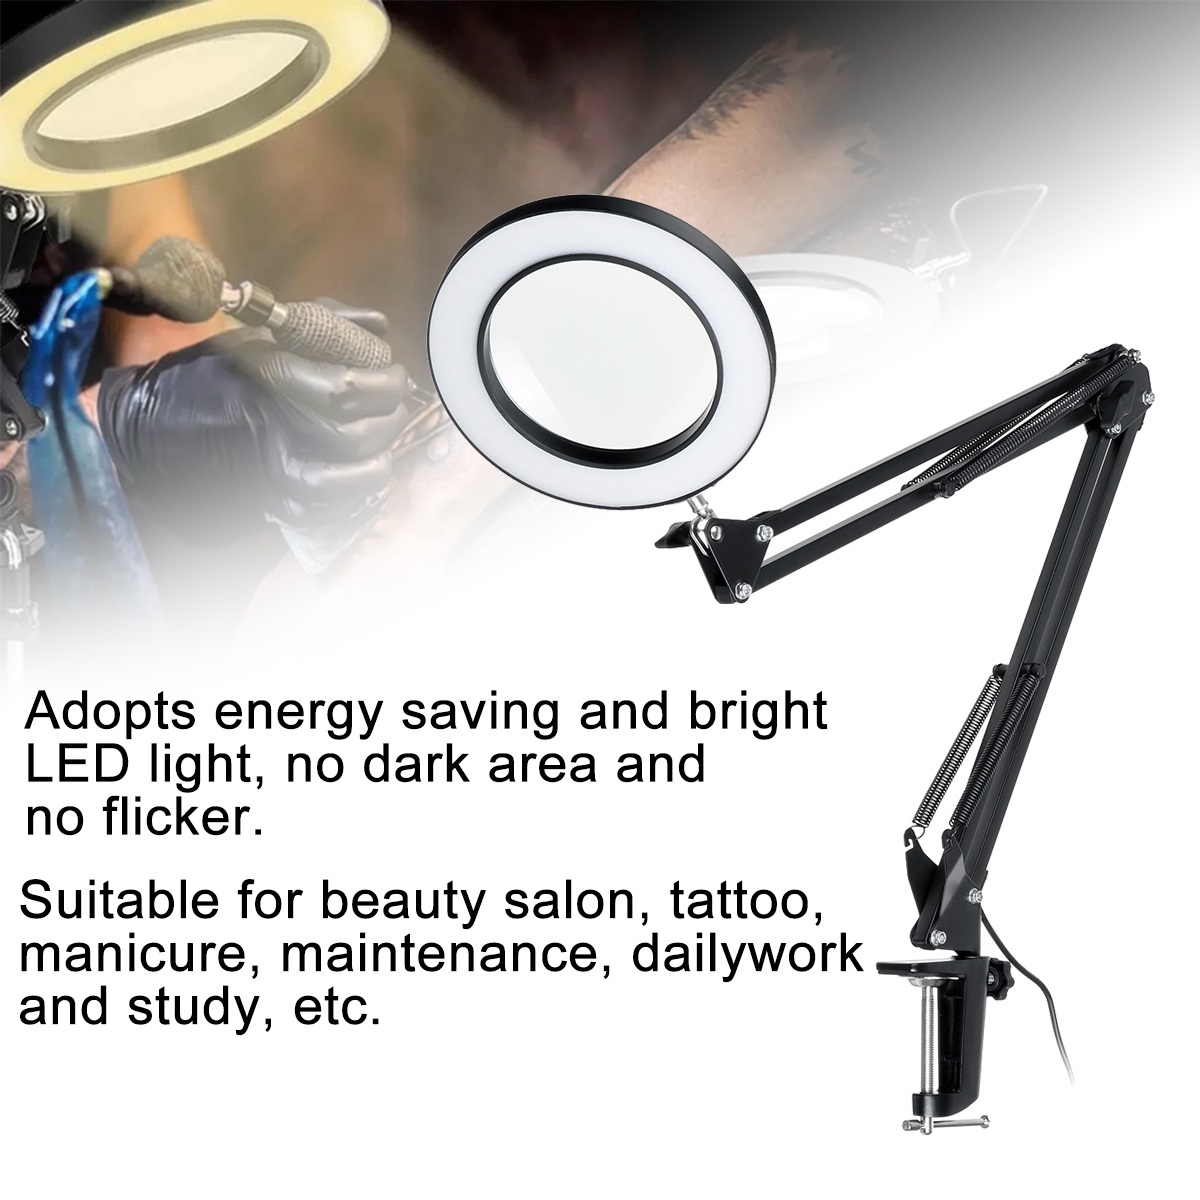 5X-Magnifying-Lamp-Clamp-Mount-LED-Magnifier-Lamp-Manicure-Tattoo-Beauty-Light-1801341-6